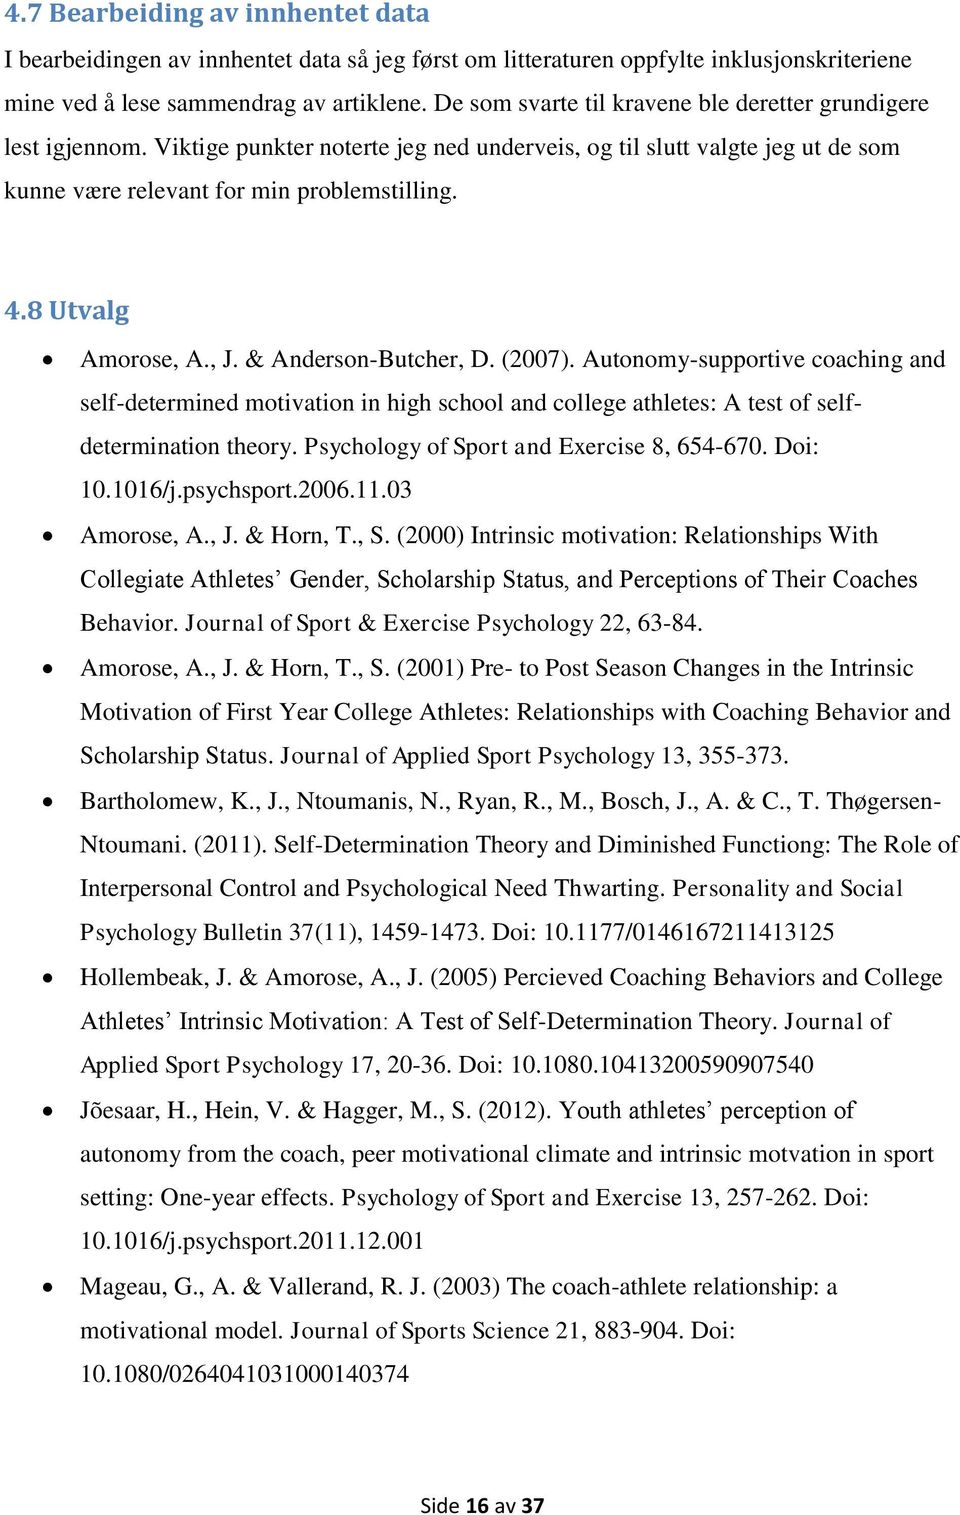 8 Utvalg Amorose, A., J. & Anderson-Butcher, D. (2007). Autonomy-supportive coaching and self-determined motivation in high school and college athletes: A test of selfdetermination theory.